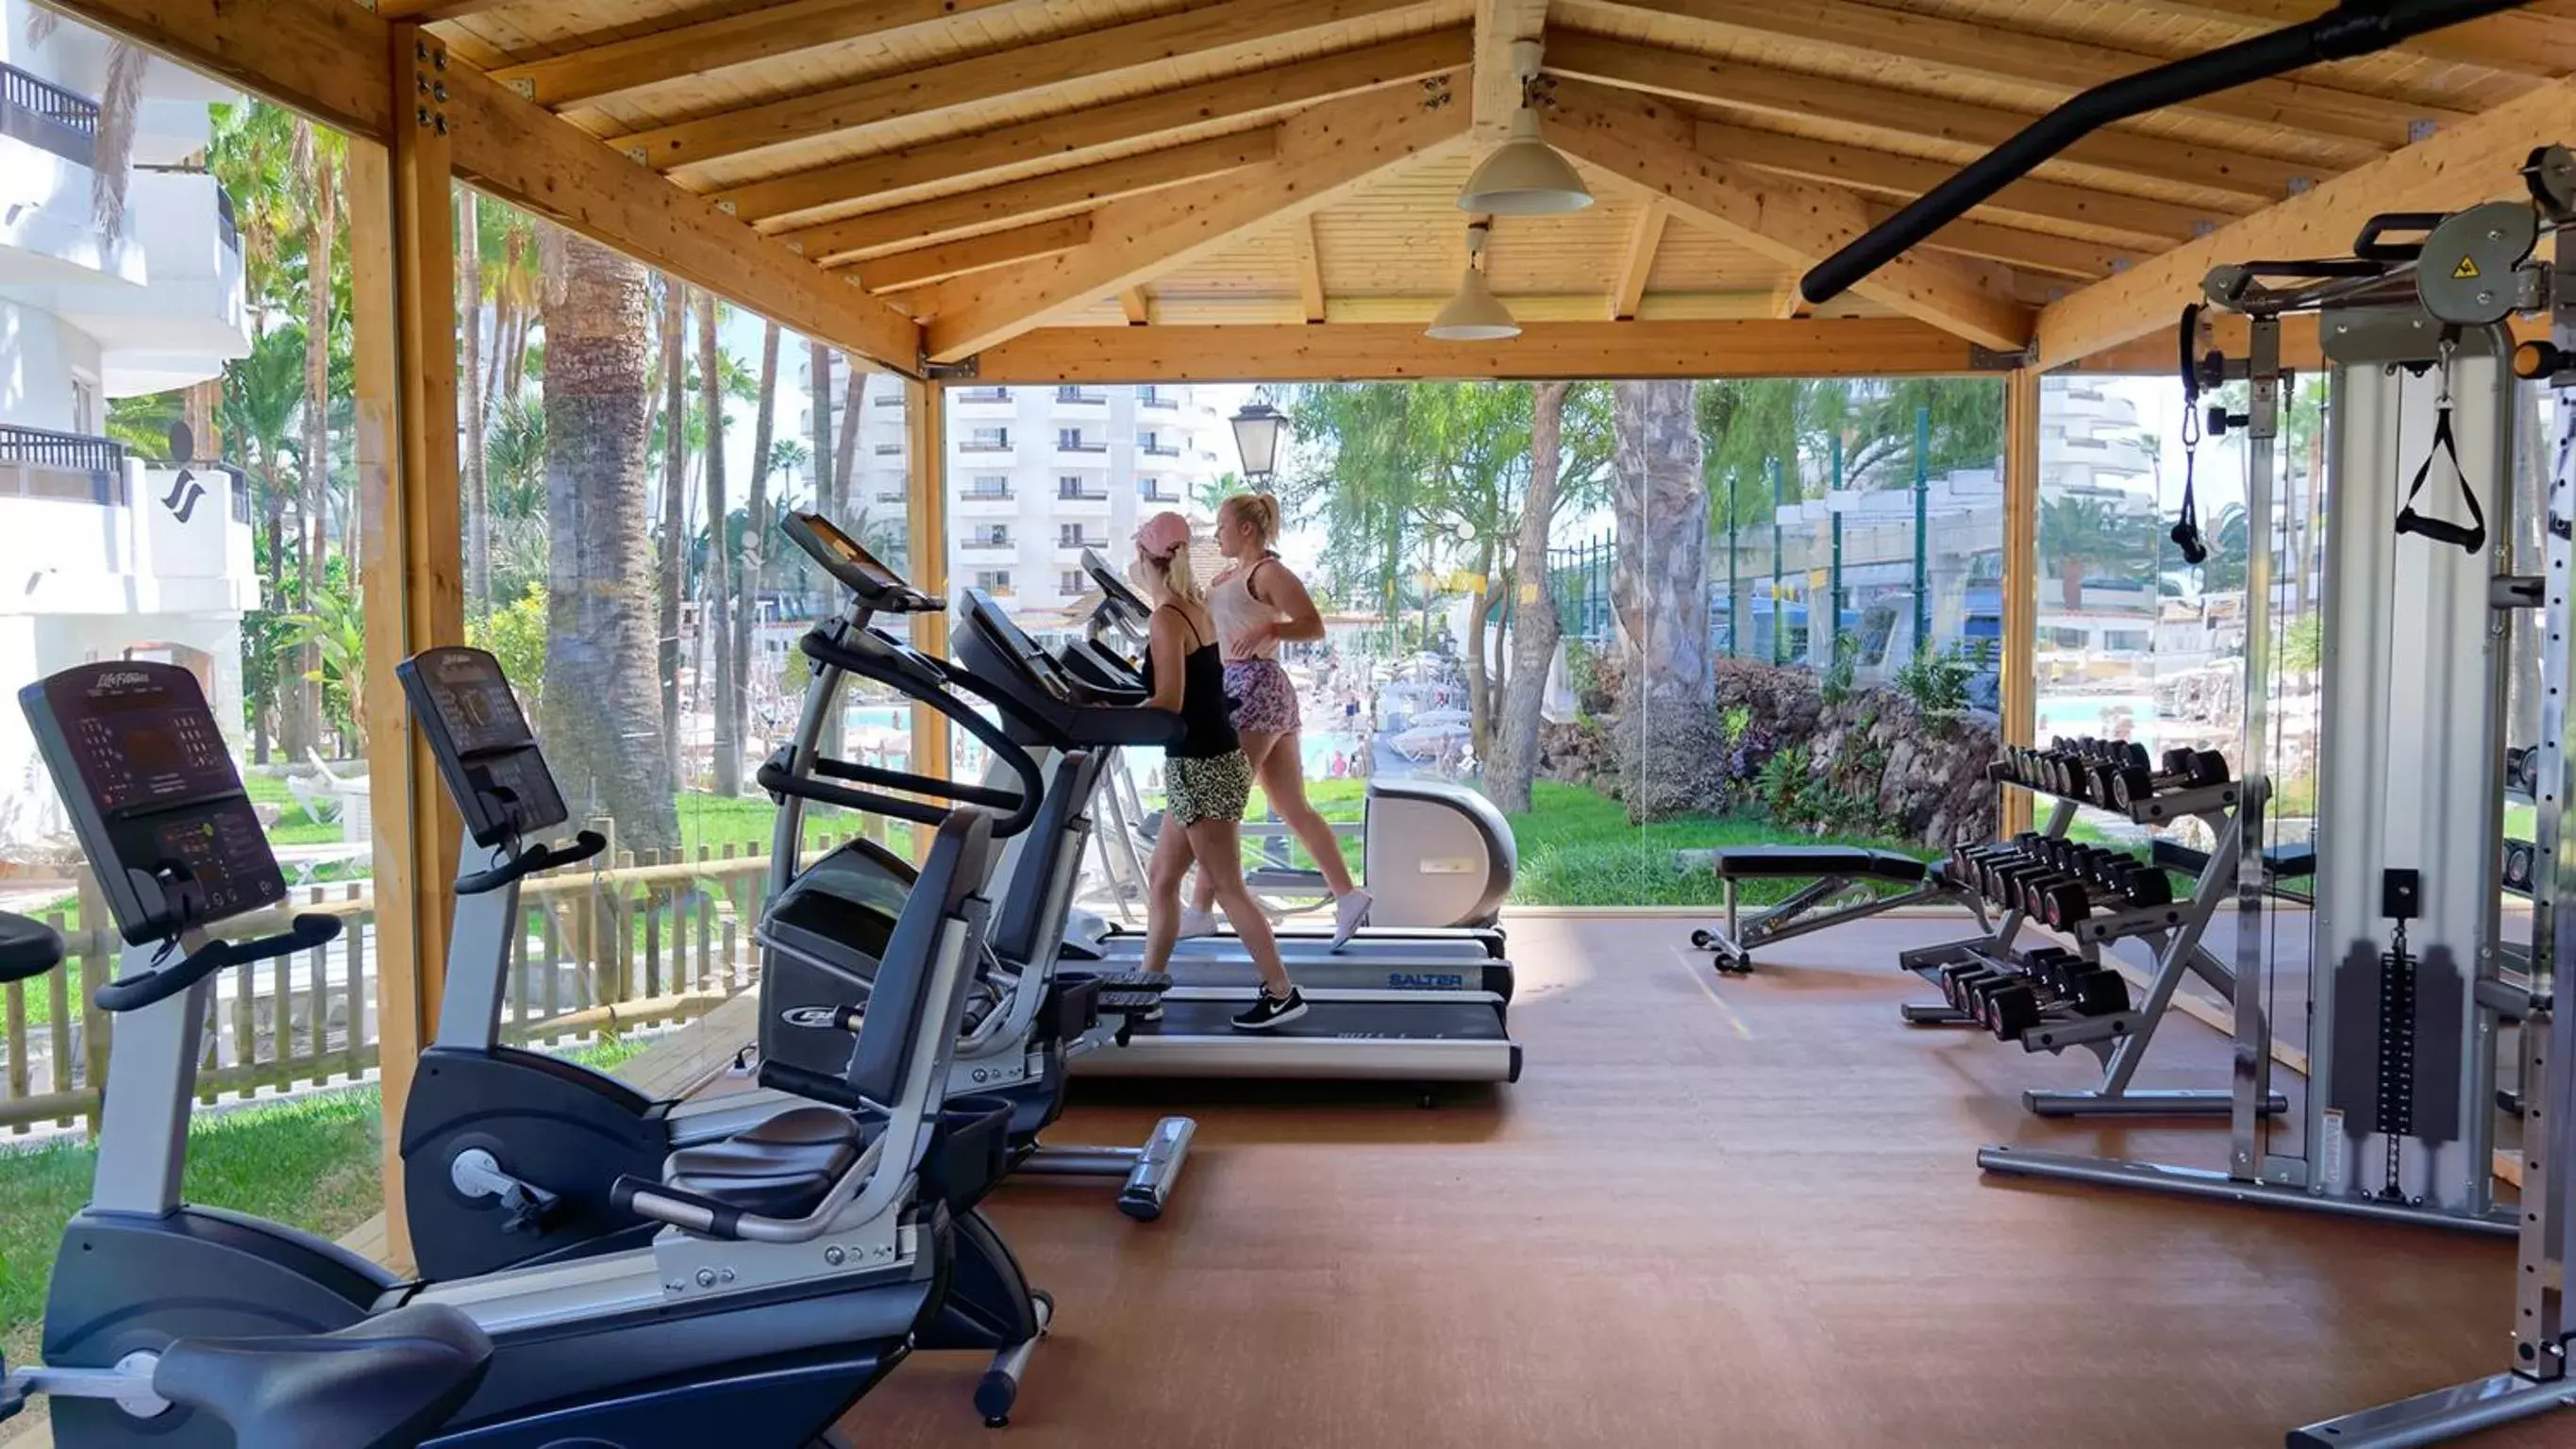 Fitness centre/facilities, Fitness Center/Facilities in Servatur Waikiki